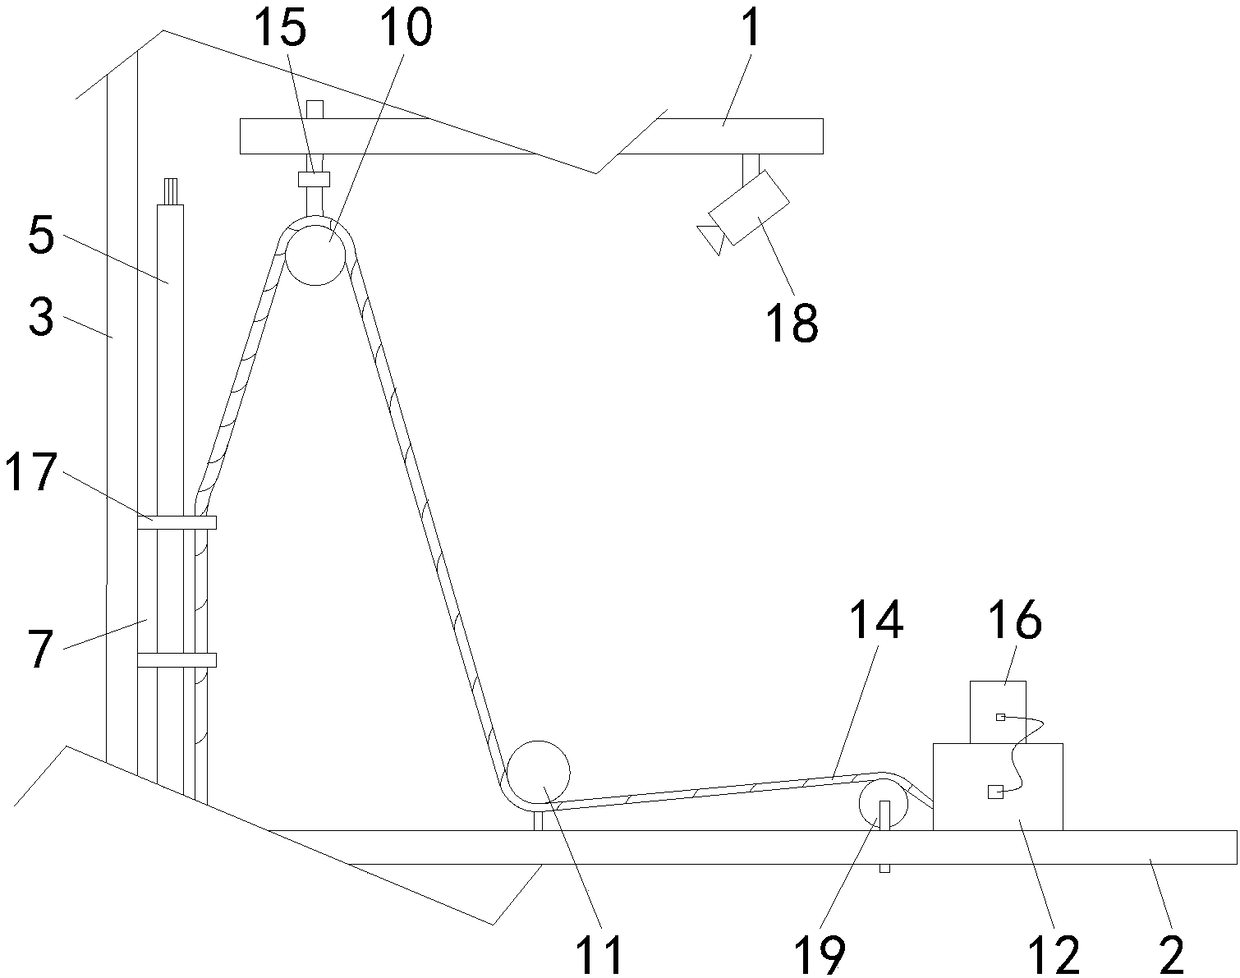 Wirerope-accompanying cable vertical hoisting system and construction method thereof